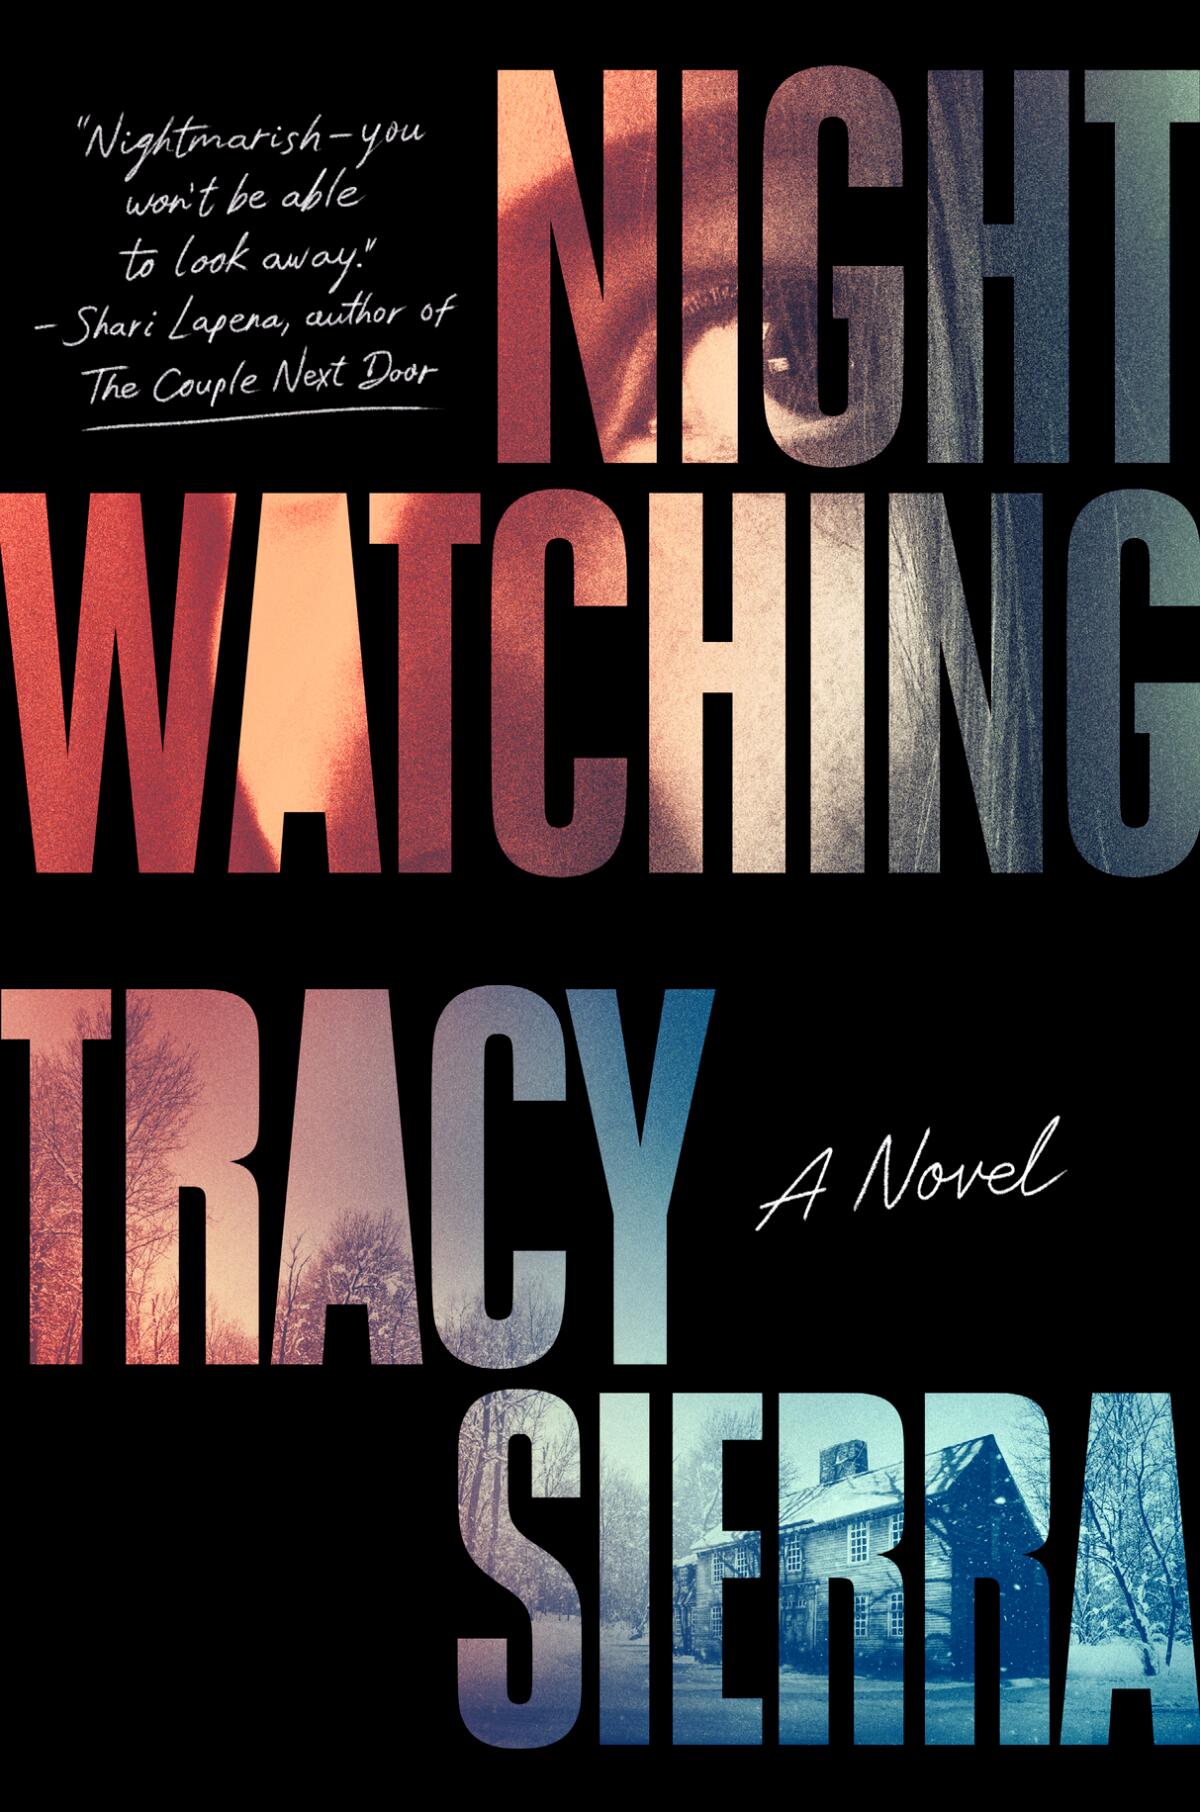 Cover of "Nightwatching" by Tracy Sierra.